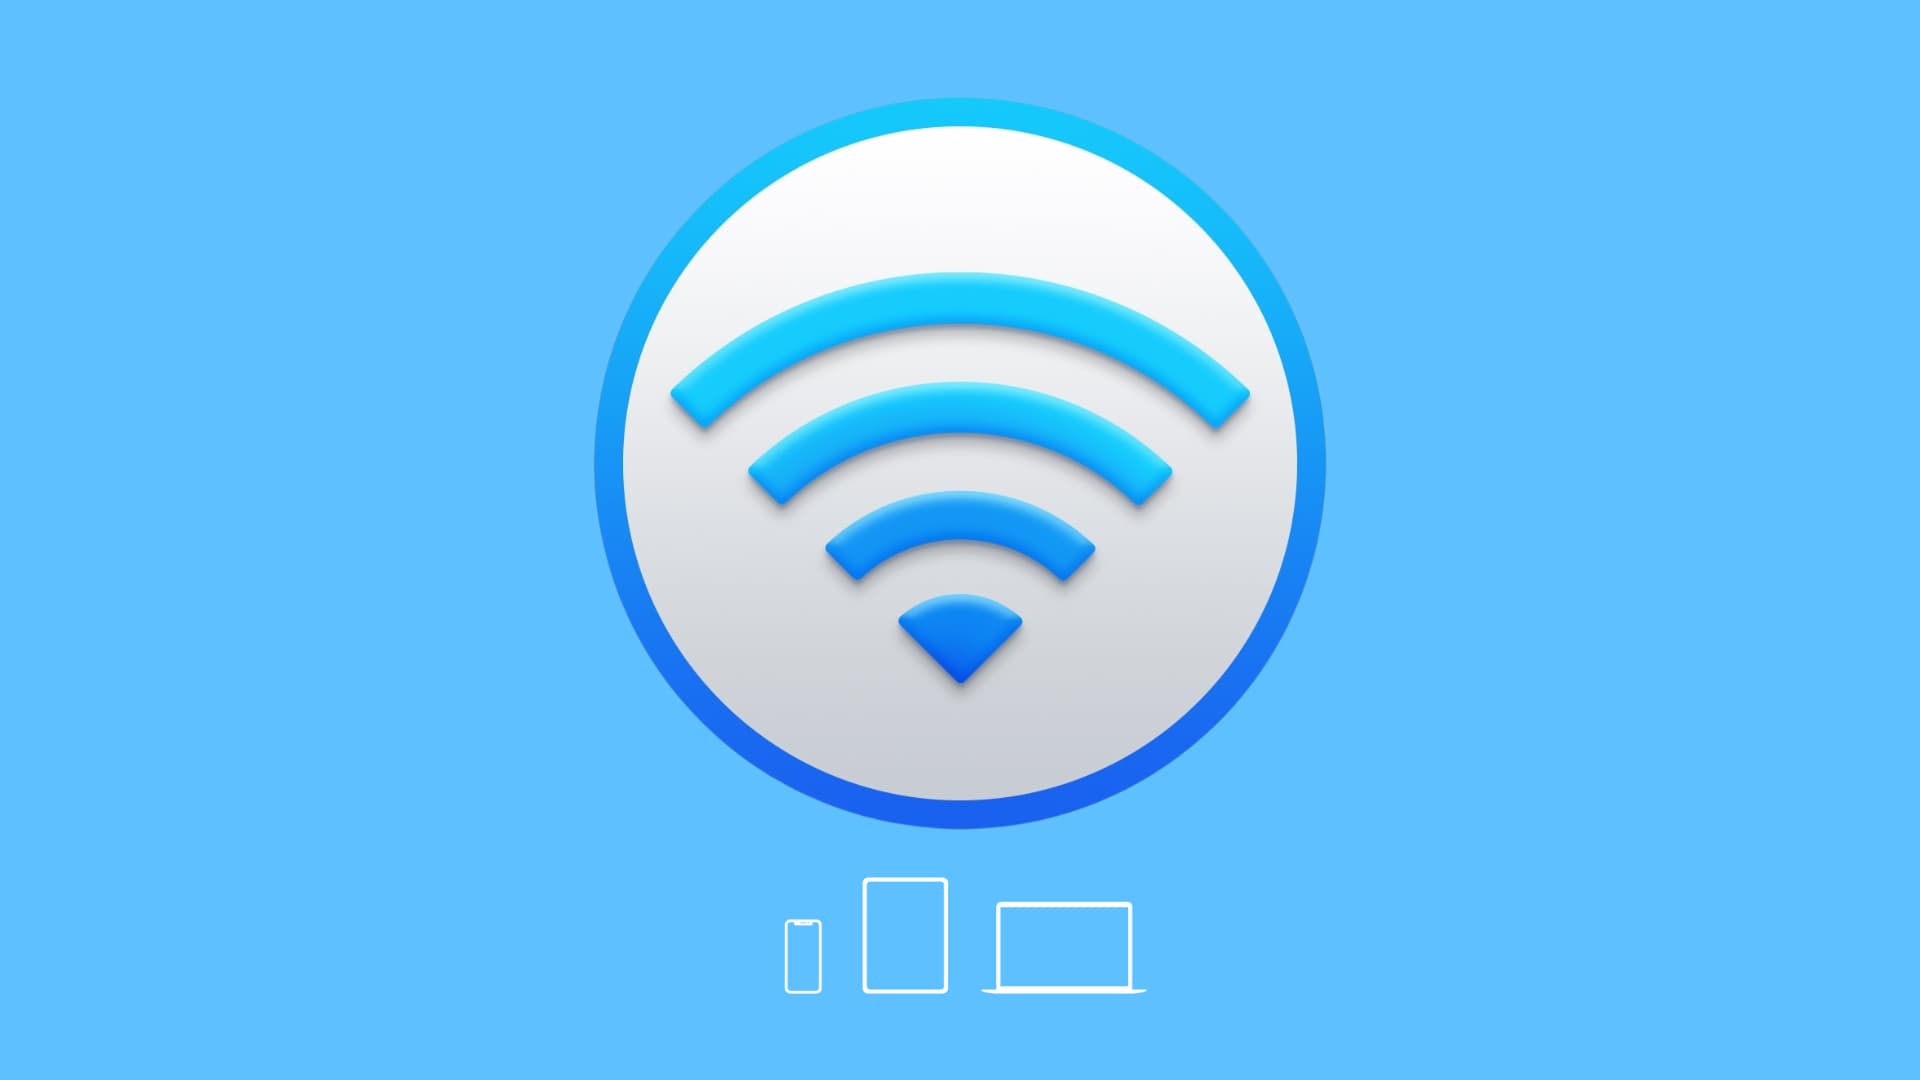 A Wi-Fi symbol in blue color with tiny icons for iPhone, iPad, and Mac